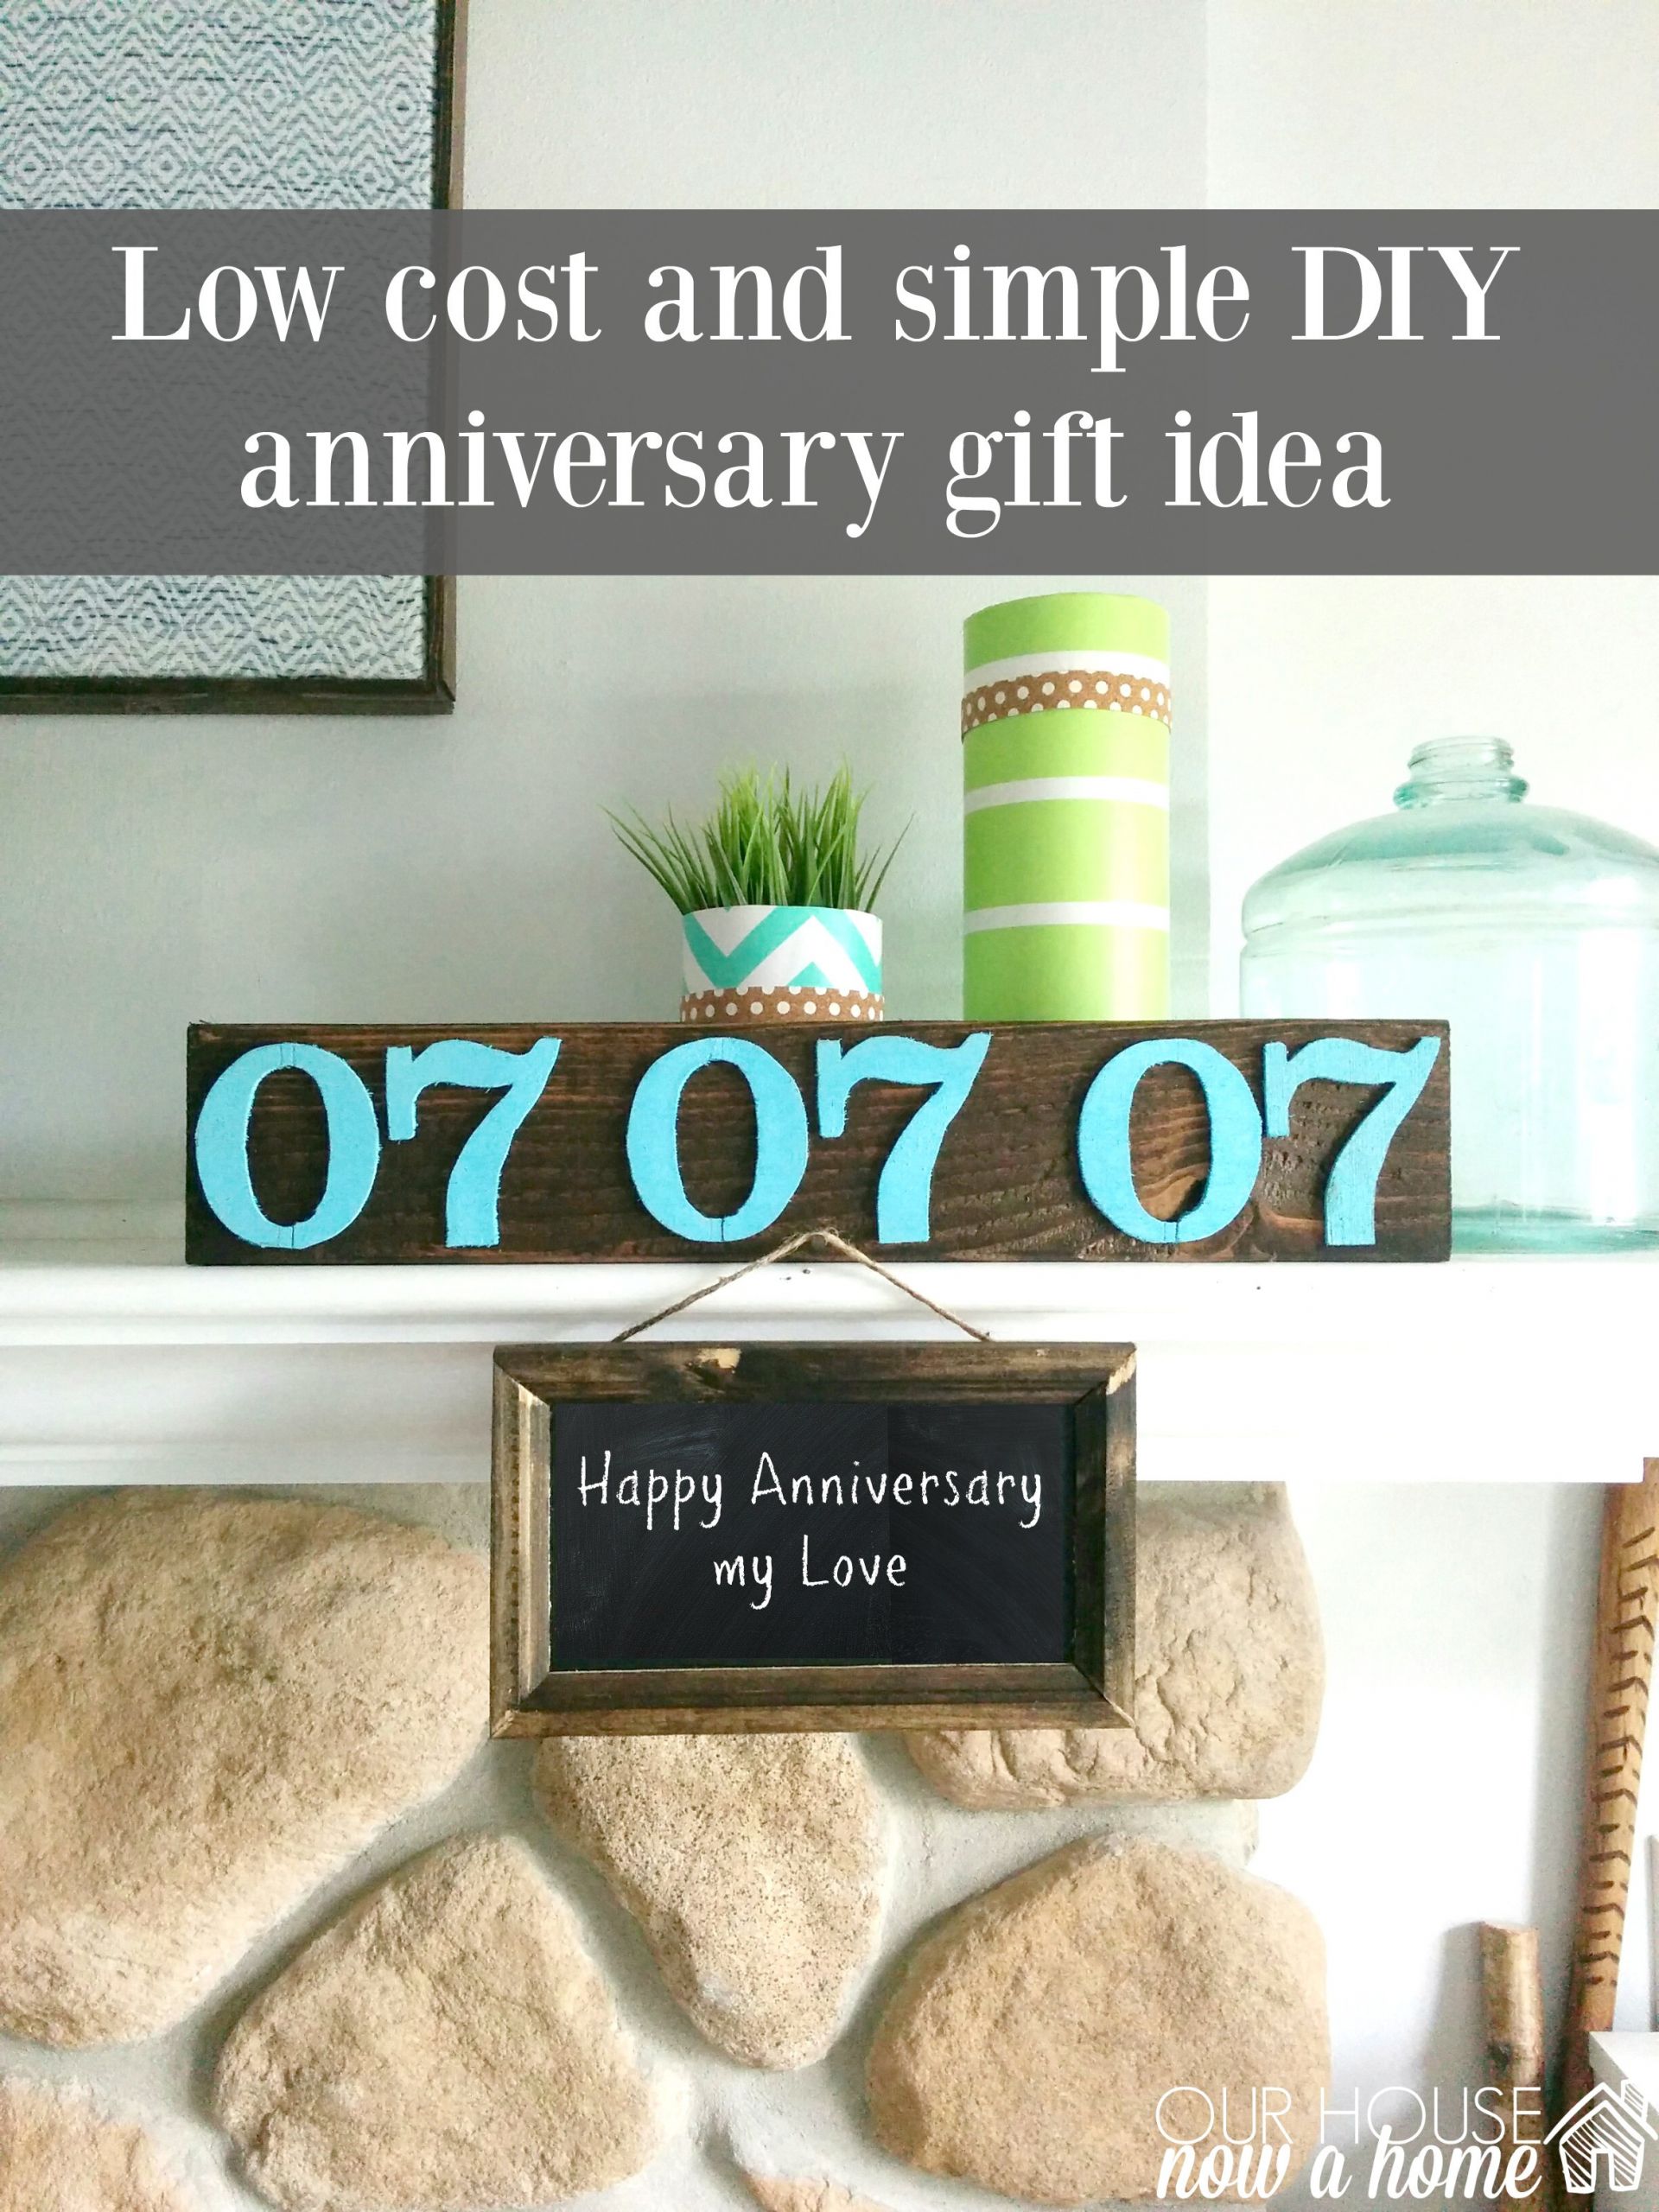 Anniversary Gift DIY
 DIY and low cost anniversary t ideas • Our House Now a Home